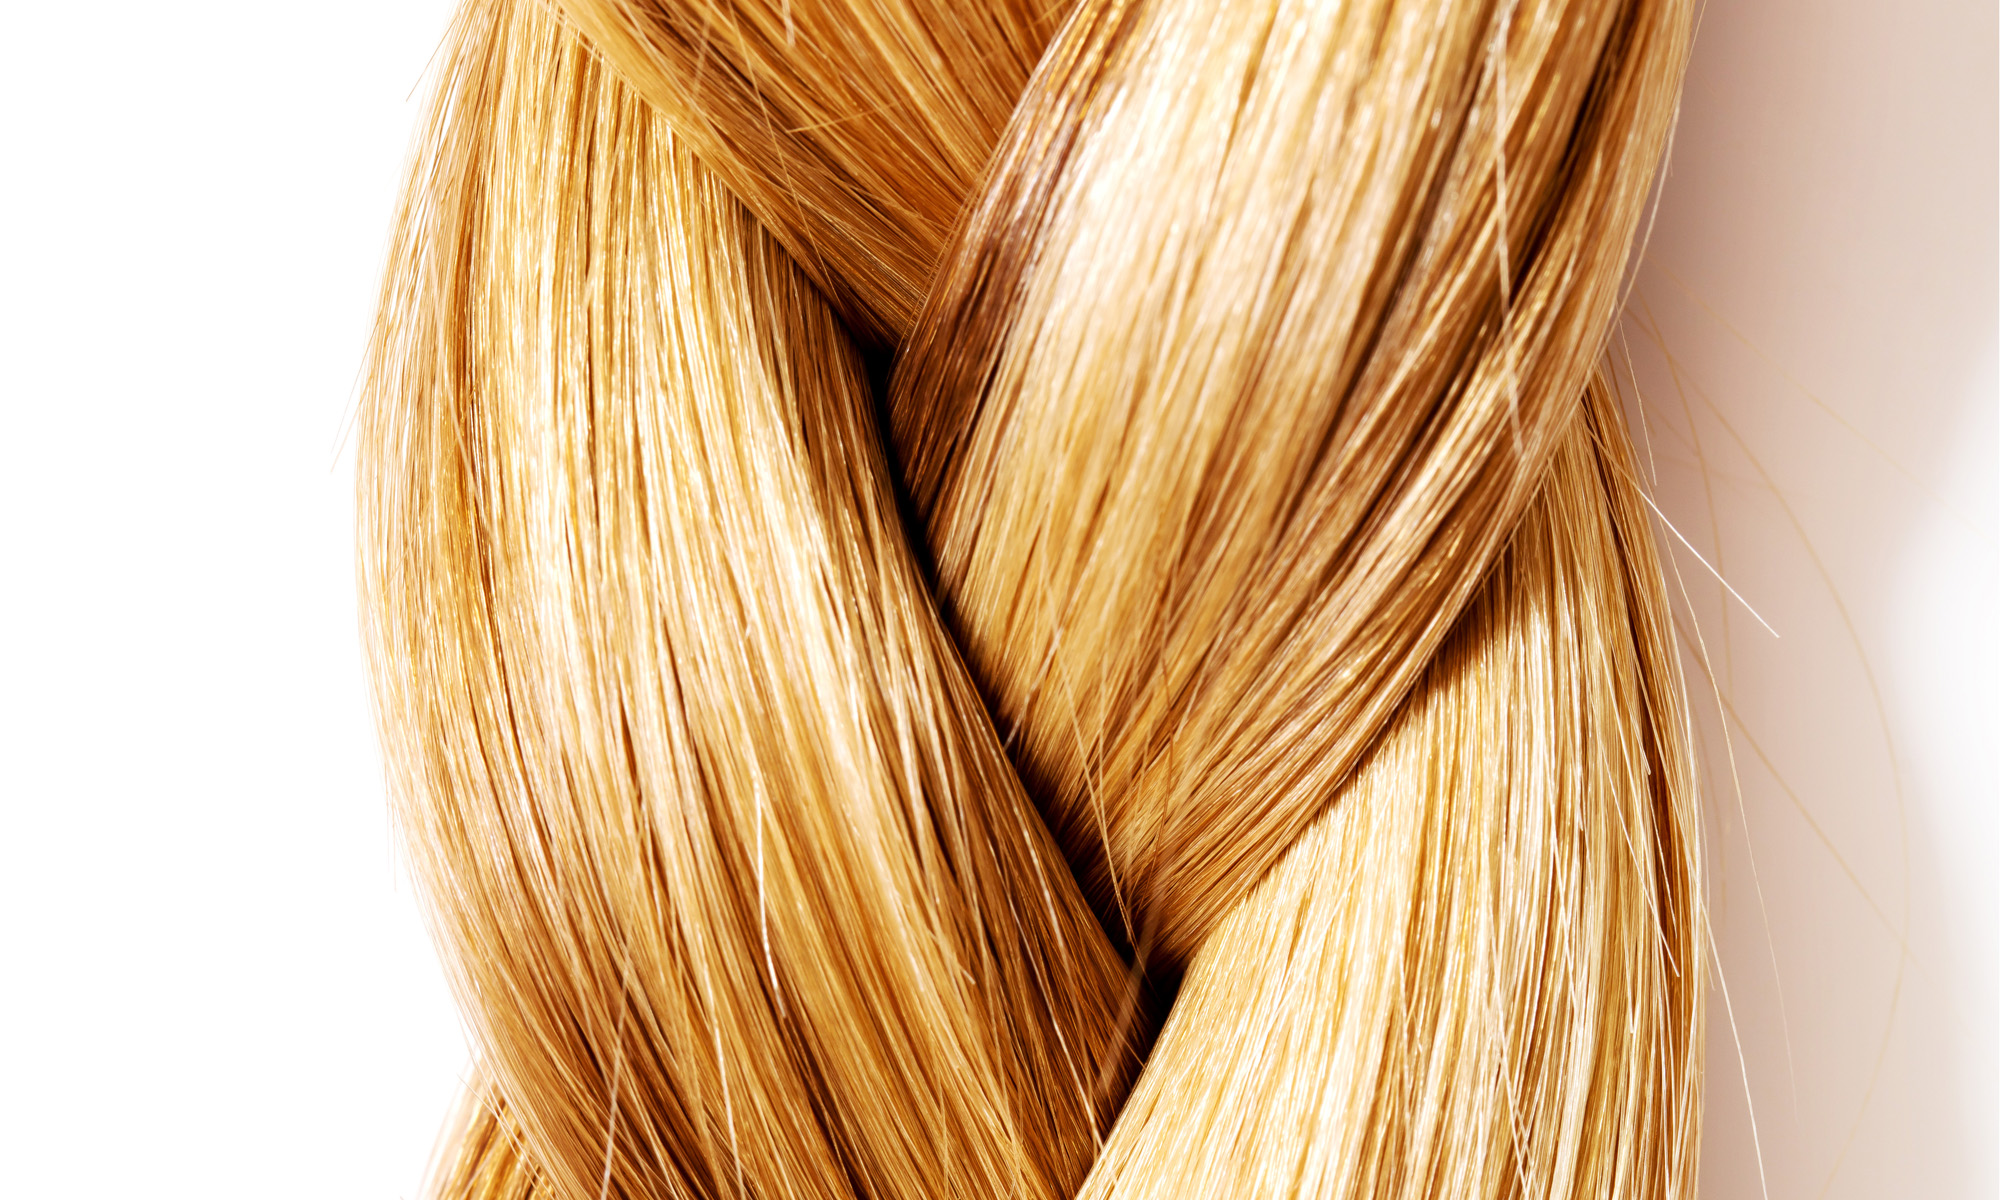 Decorative image - Braided hair against a white background - Heading for Hair section